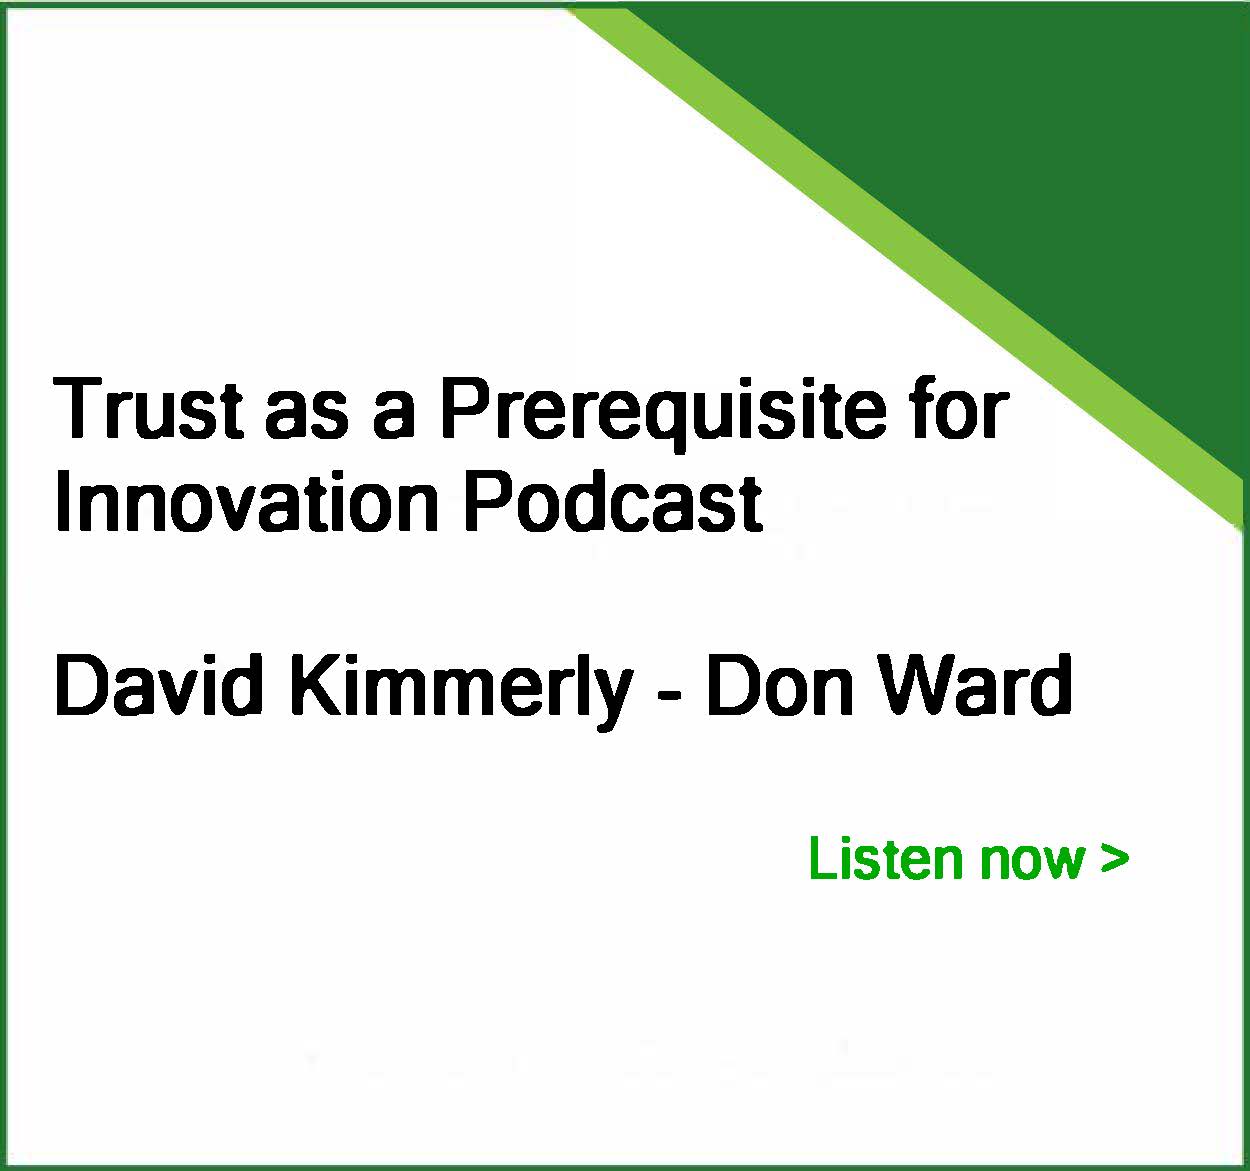 Trust as a Prerequisite for Innovation